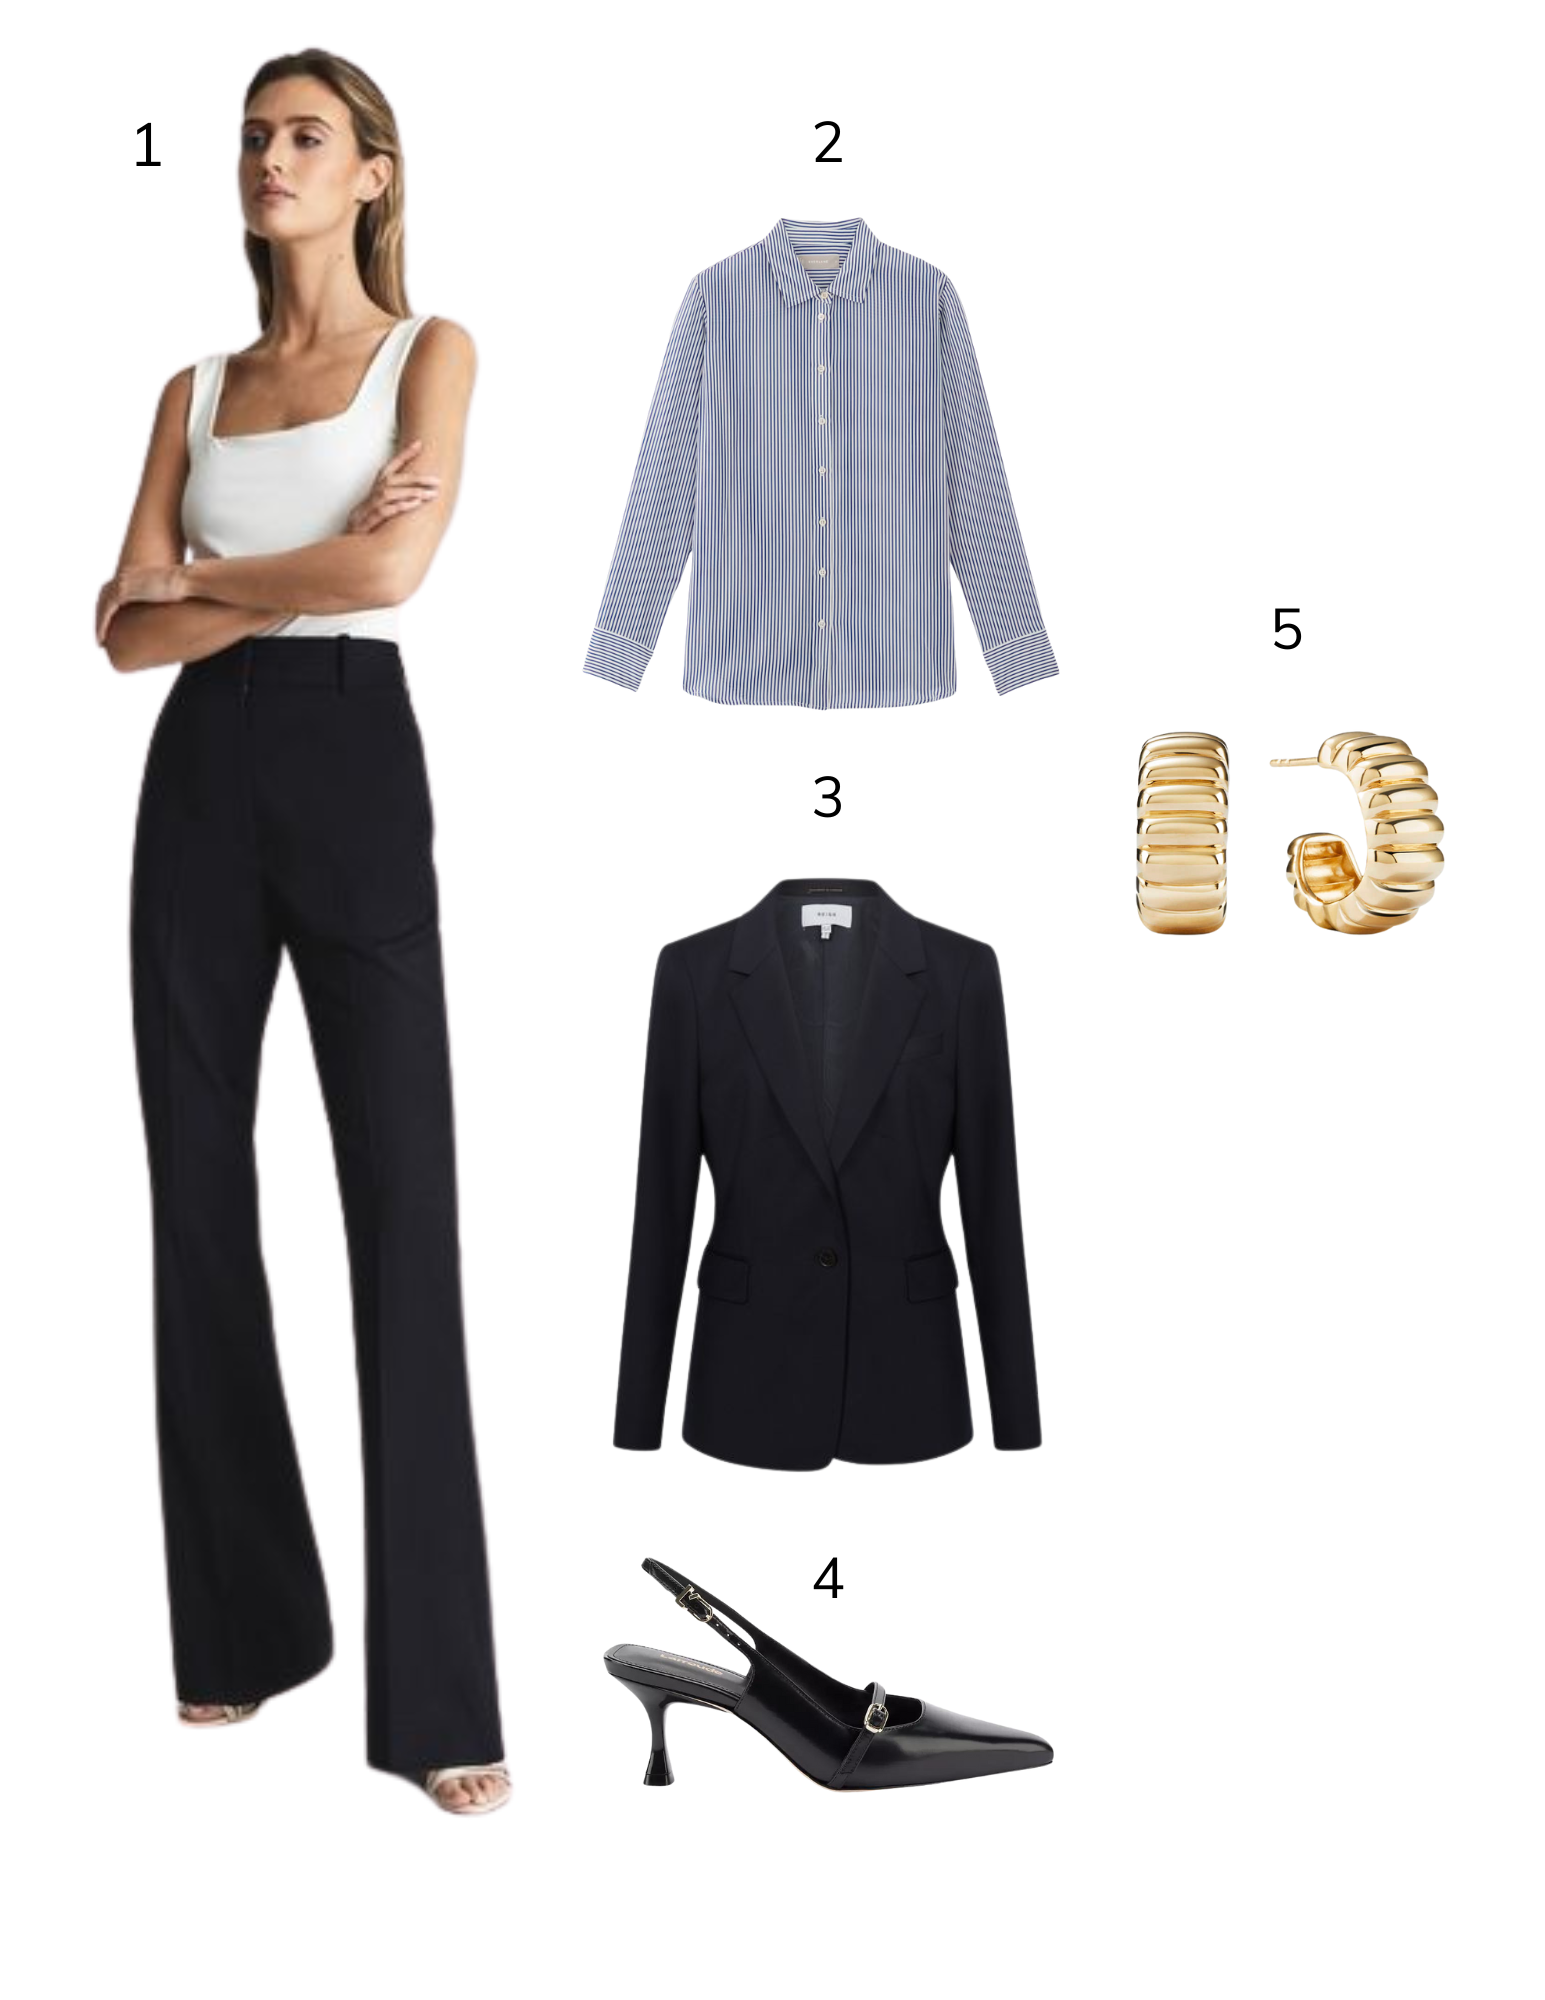 35 Stylish Outfits Ideas For Professional Women  Professional work outfit,  Business casual outfits for women, Work outfits women